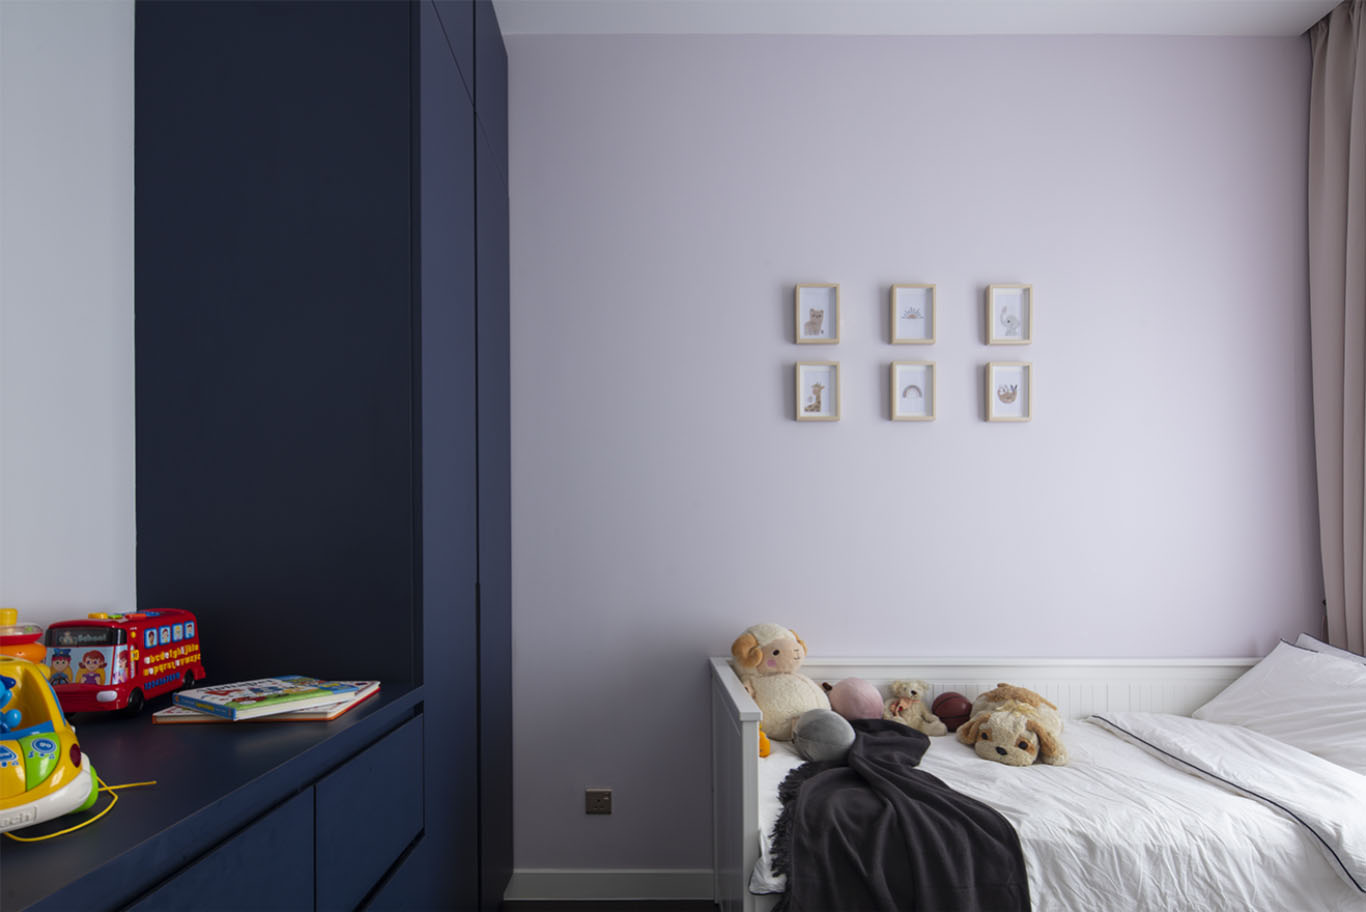 minimalist kids bedroom interior design with minimalist cute picture frame, bold blue color cupboard, and white bed